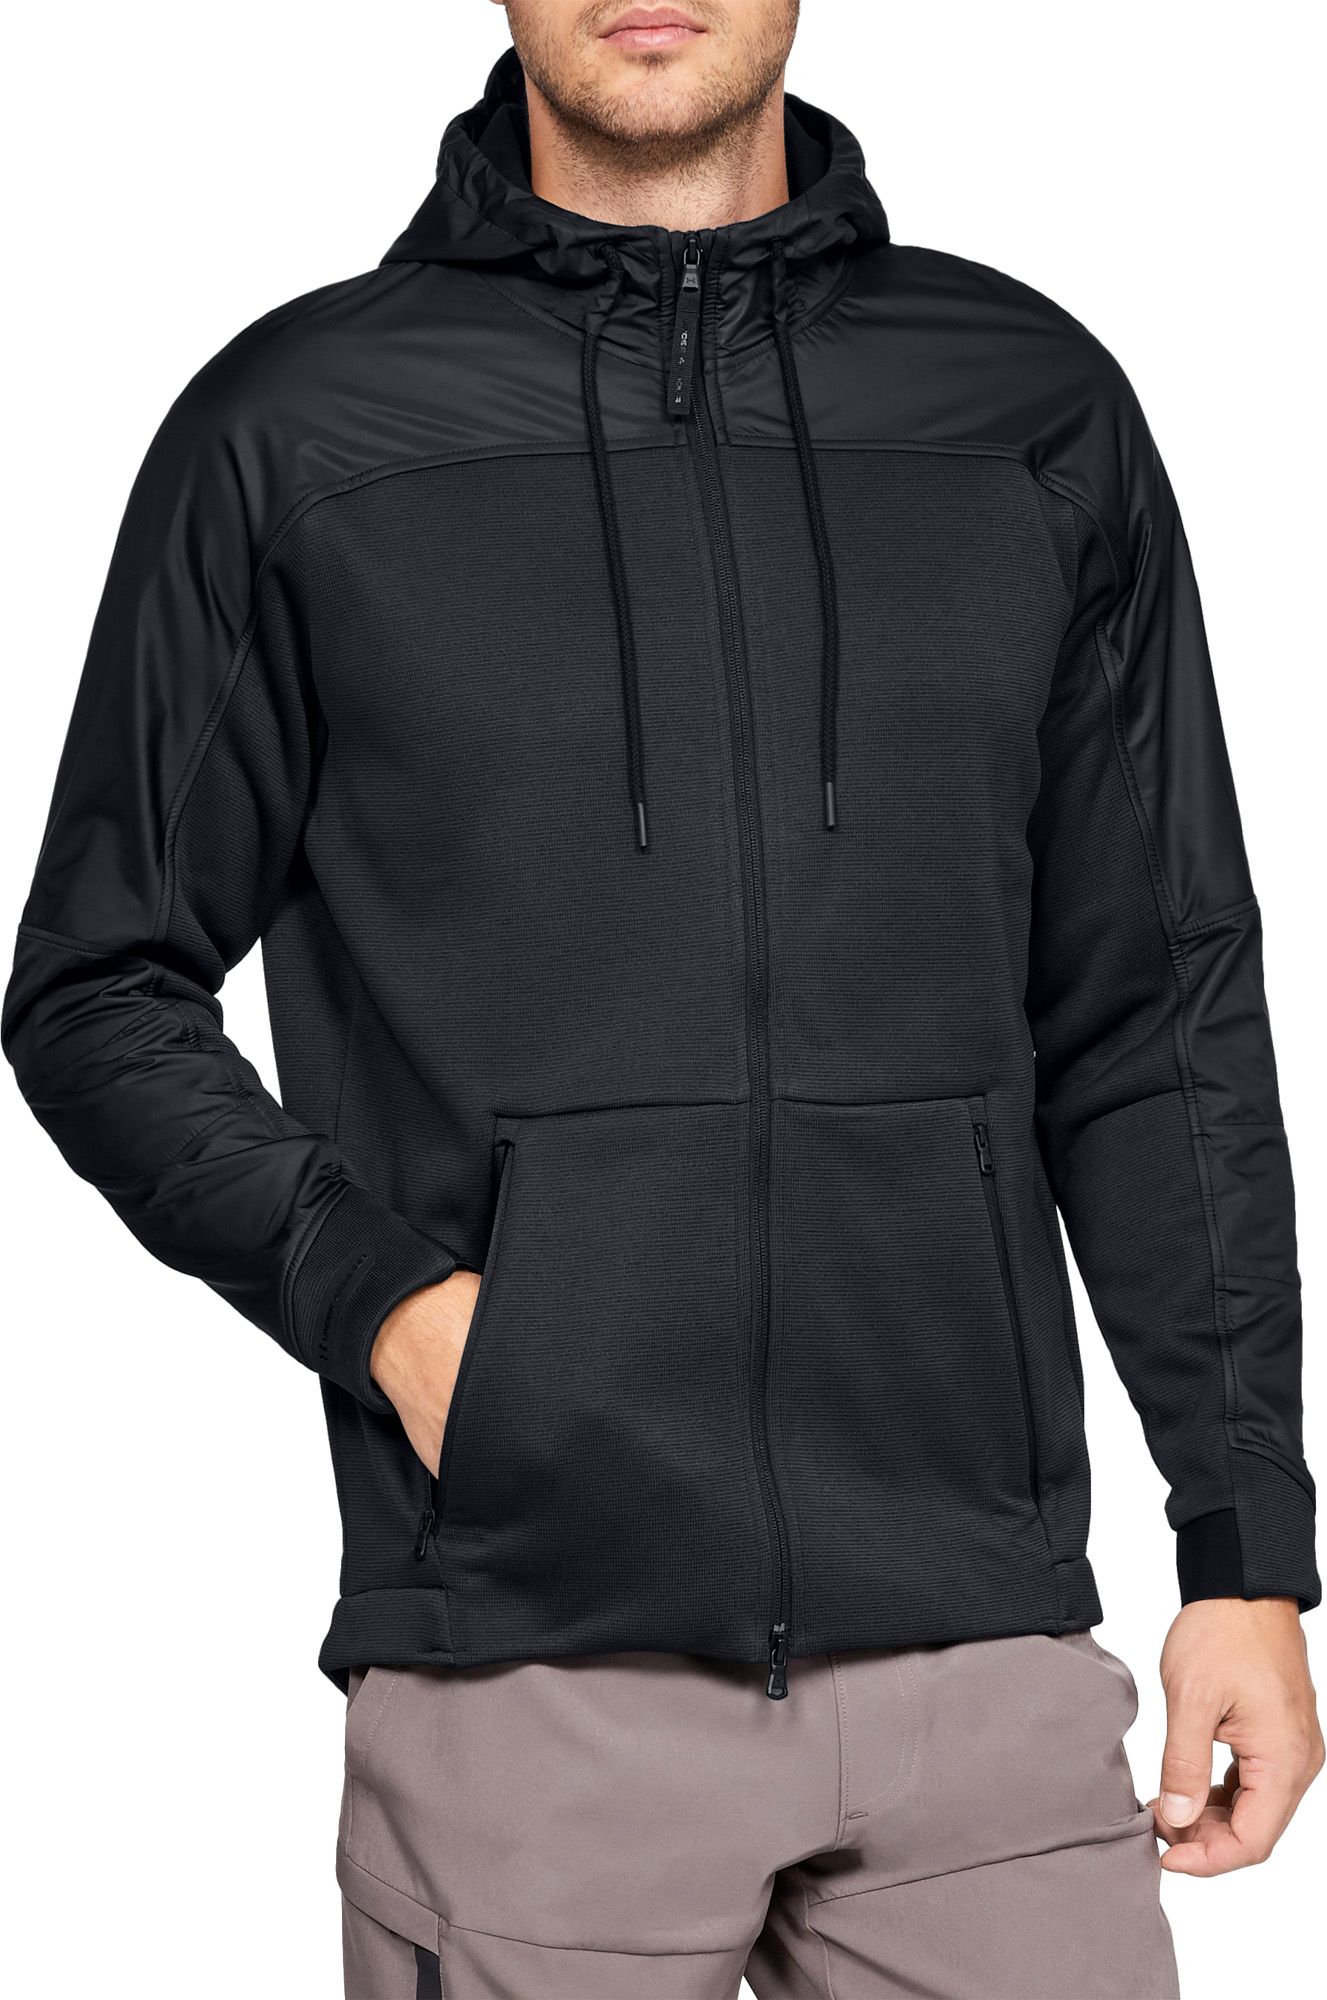 under armour thermal jacket